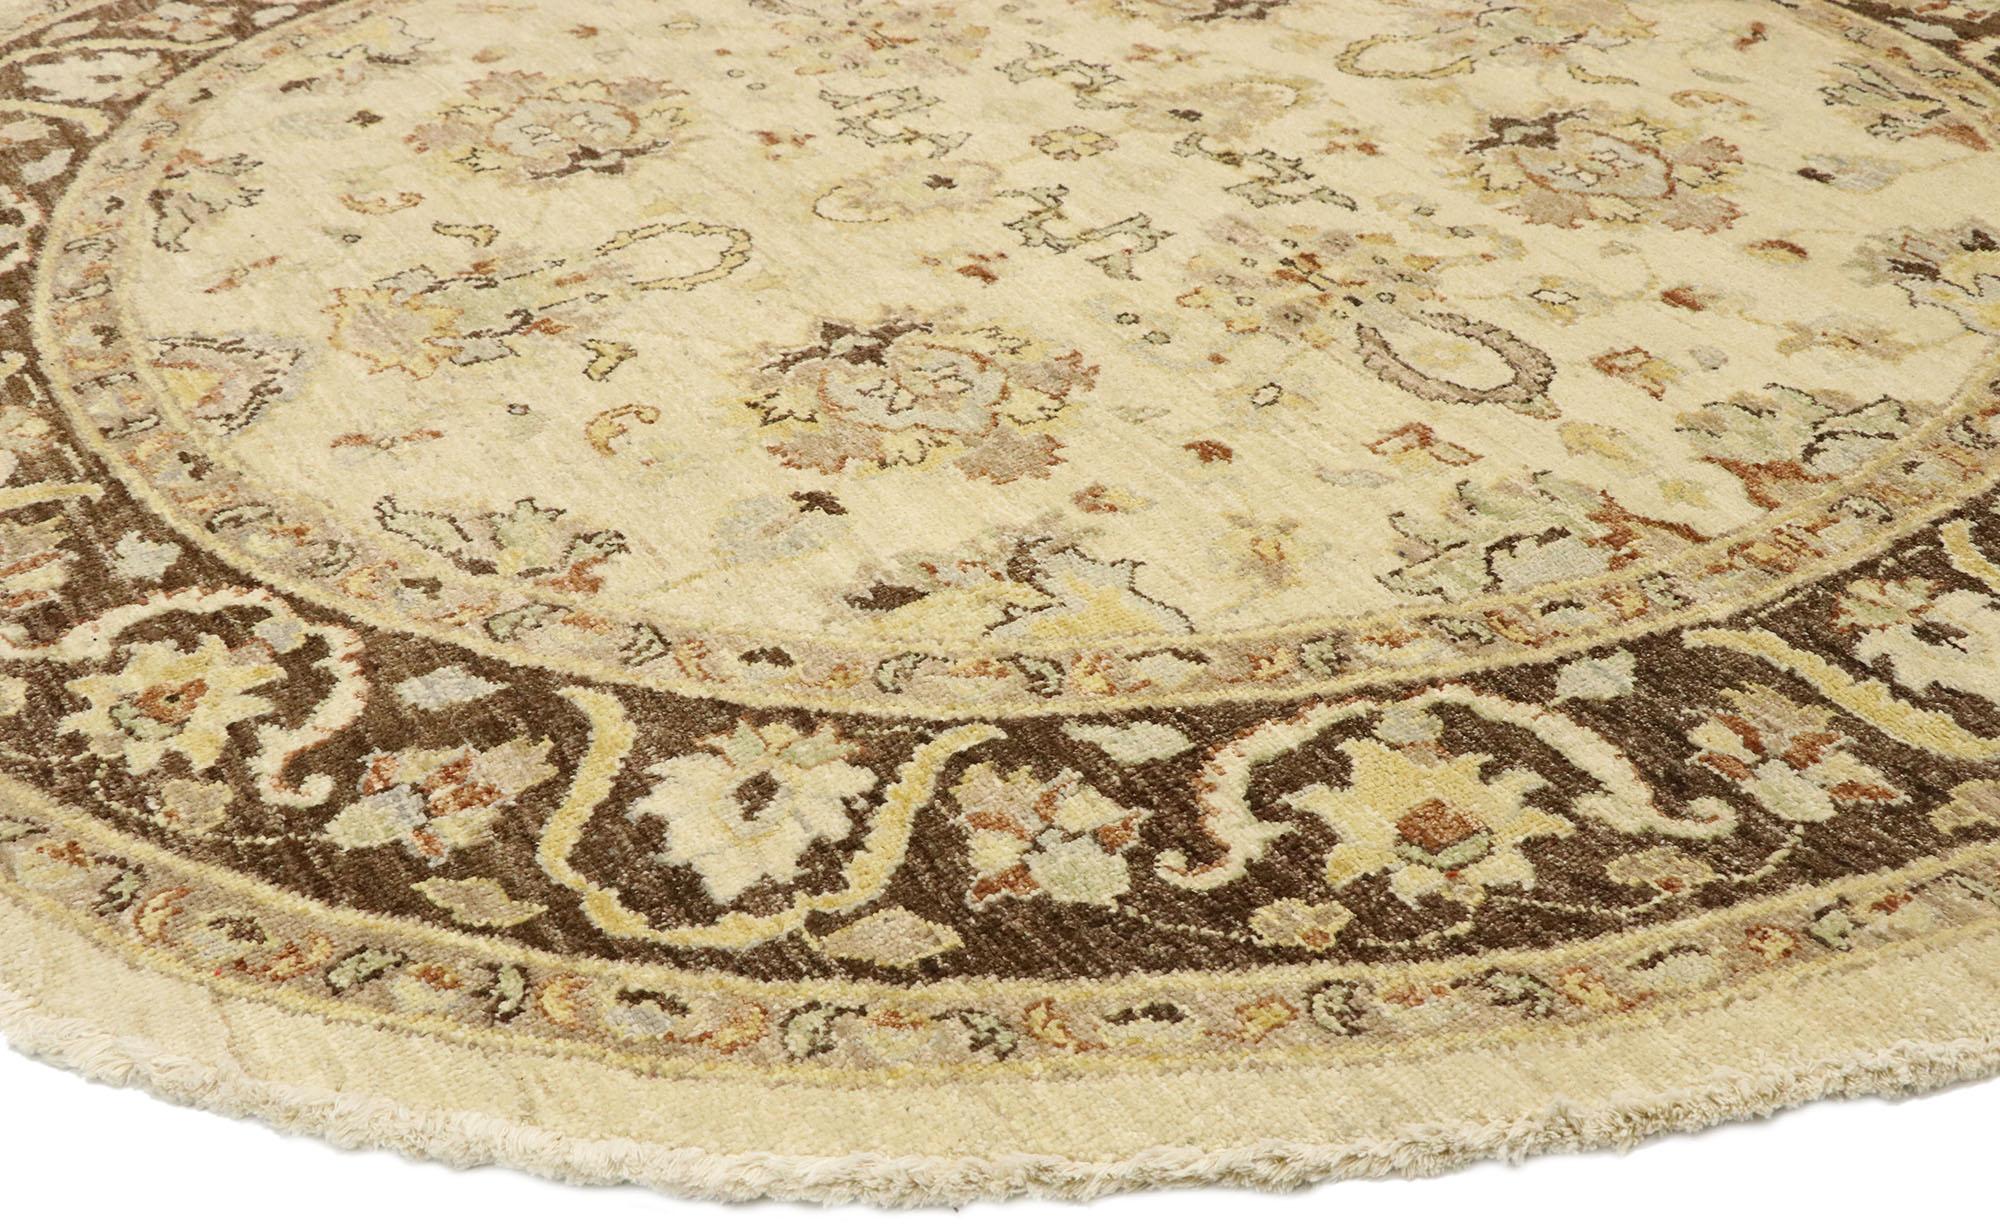 77470, vintage Indian round area rug, circular rug with Warm Farmhouse Cottage style. Effortless beauty and romantic connotations meet soft, bespoke vibes with a warm farmhouse cottage style in this hand knotted wool vintage Indian round area rug.